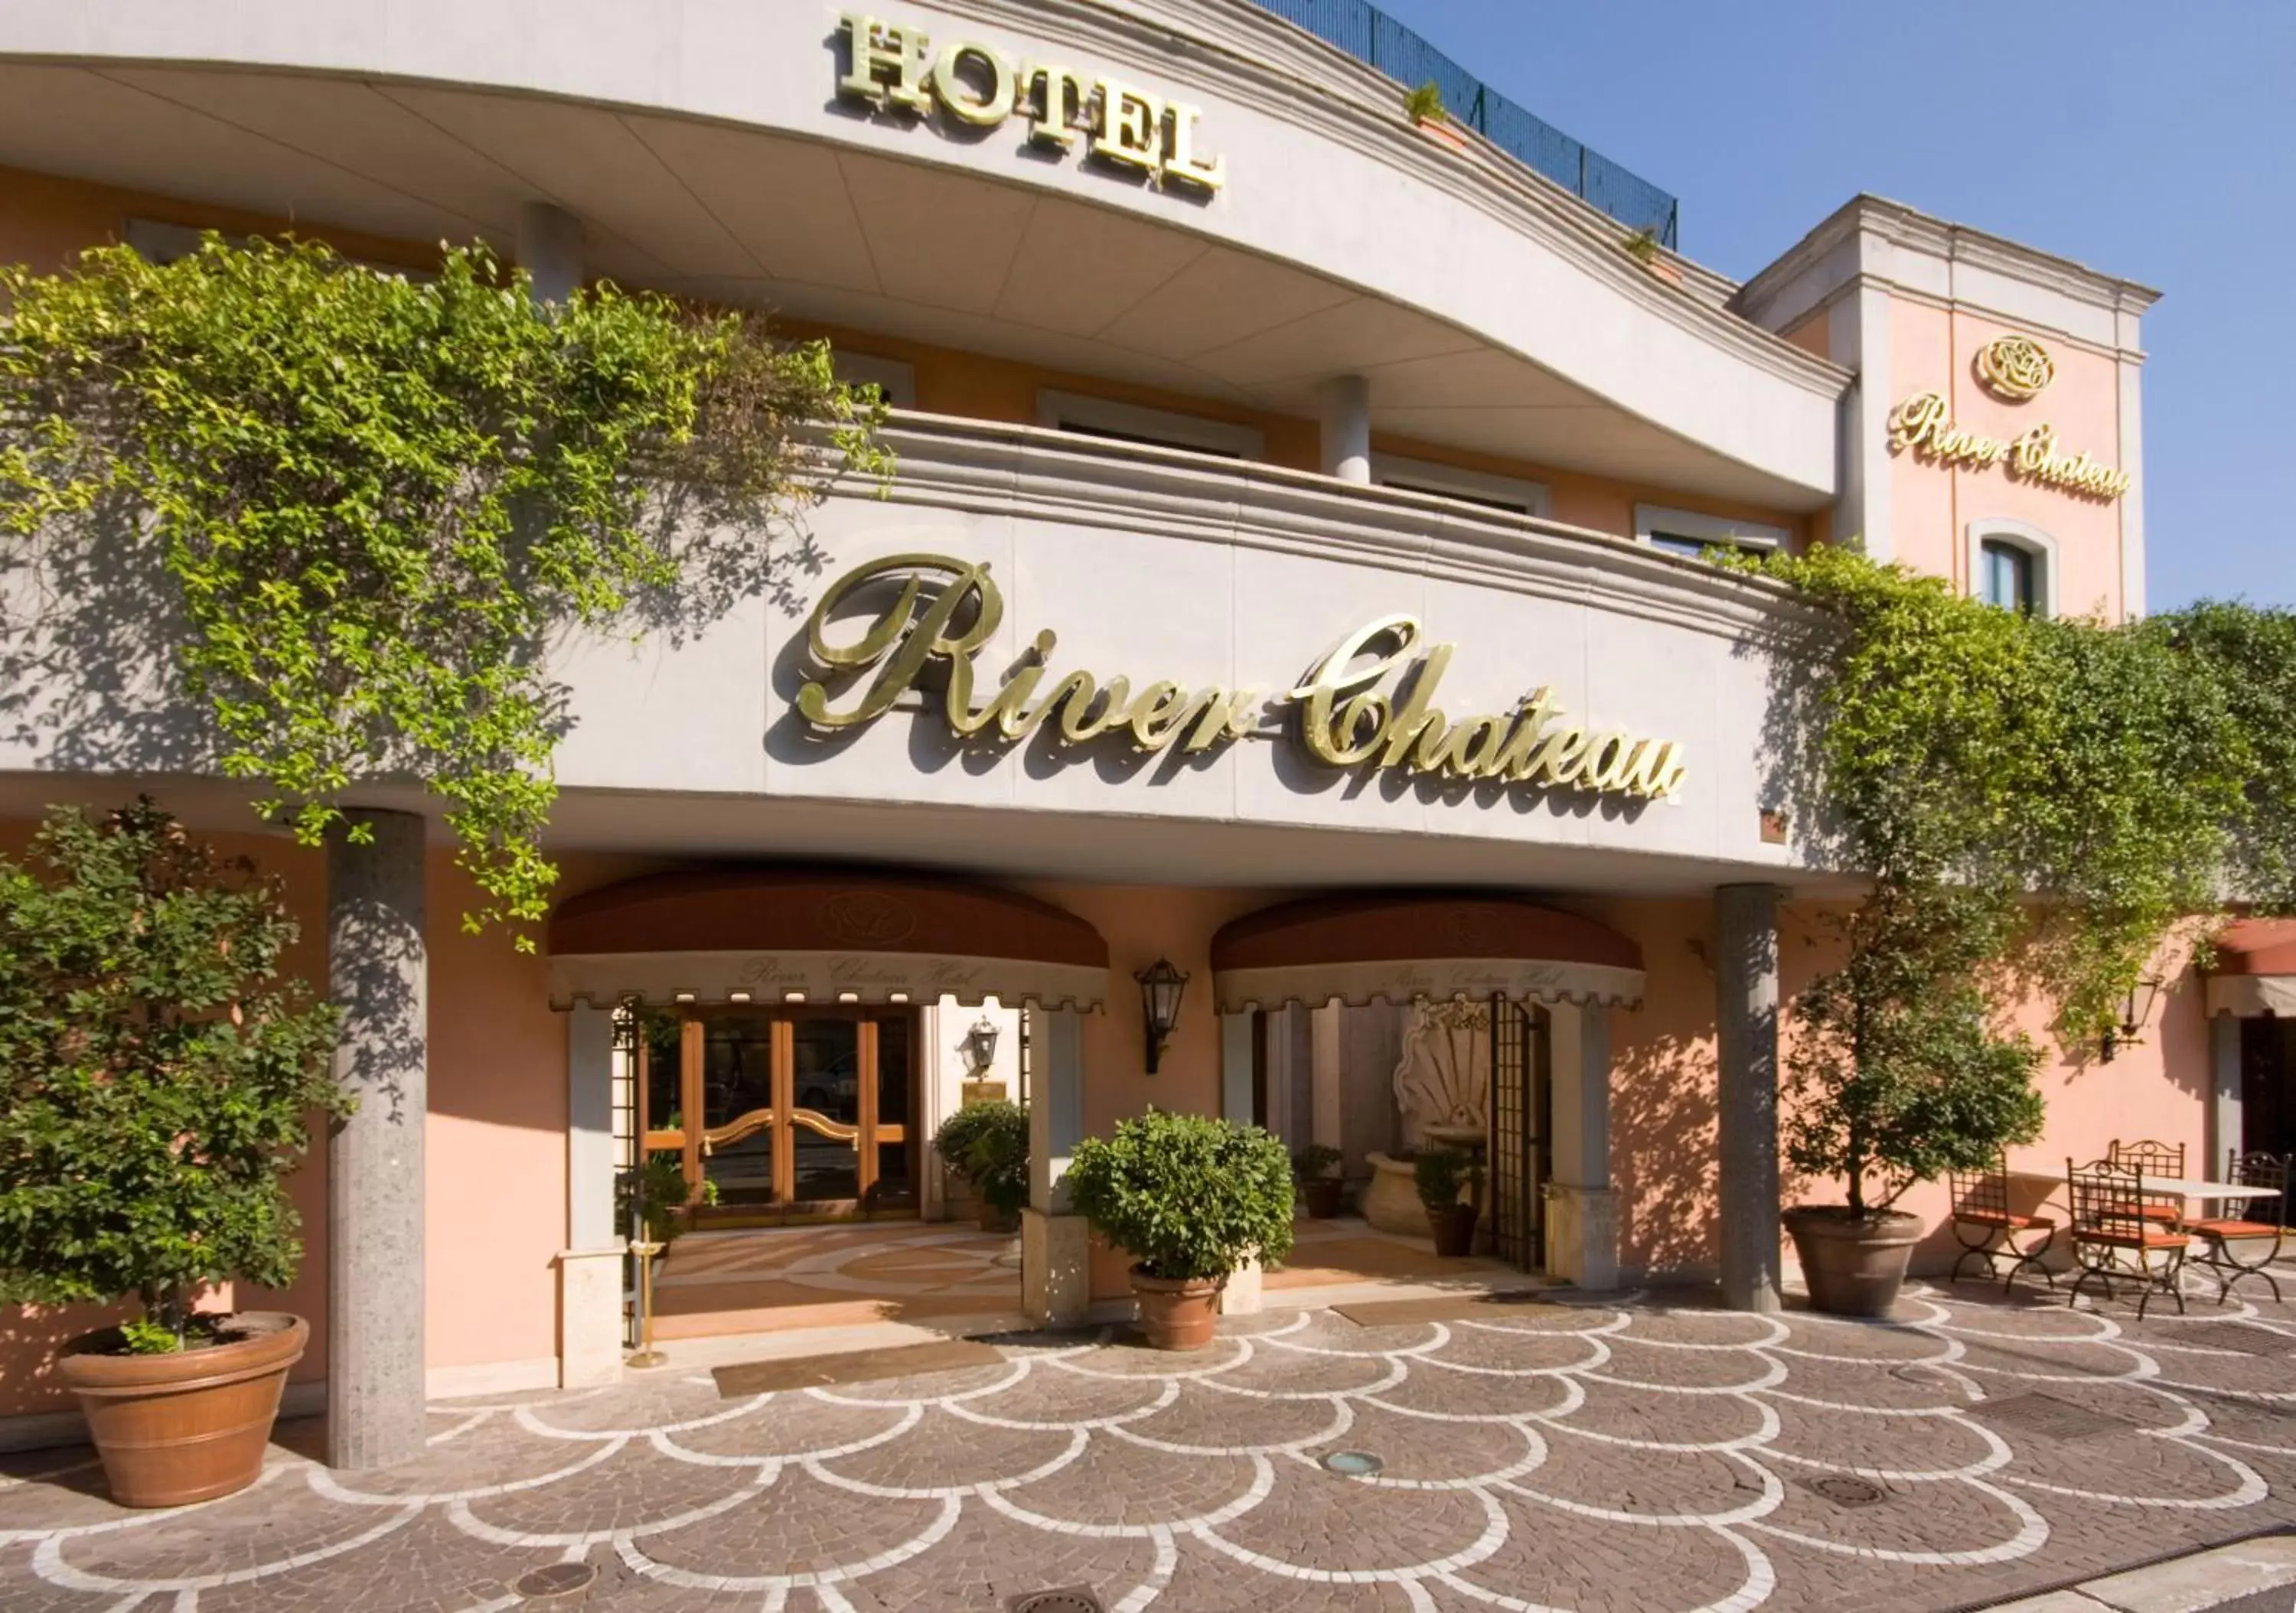 Facade/entrance, Property Building in River Chateau Hotel